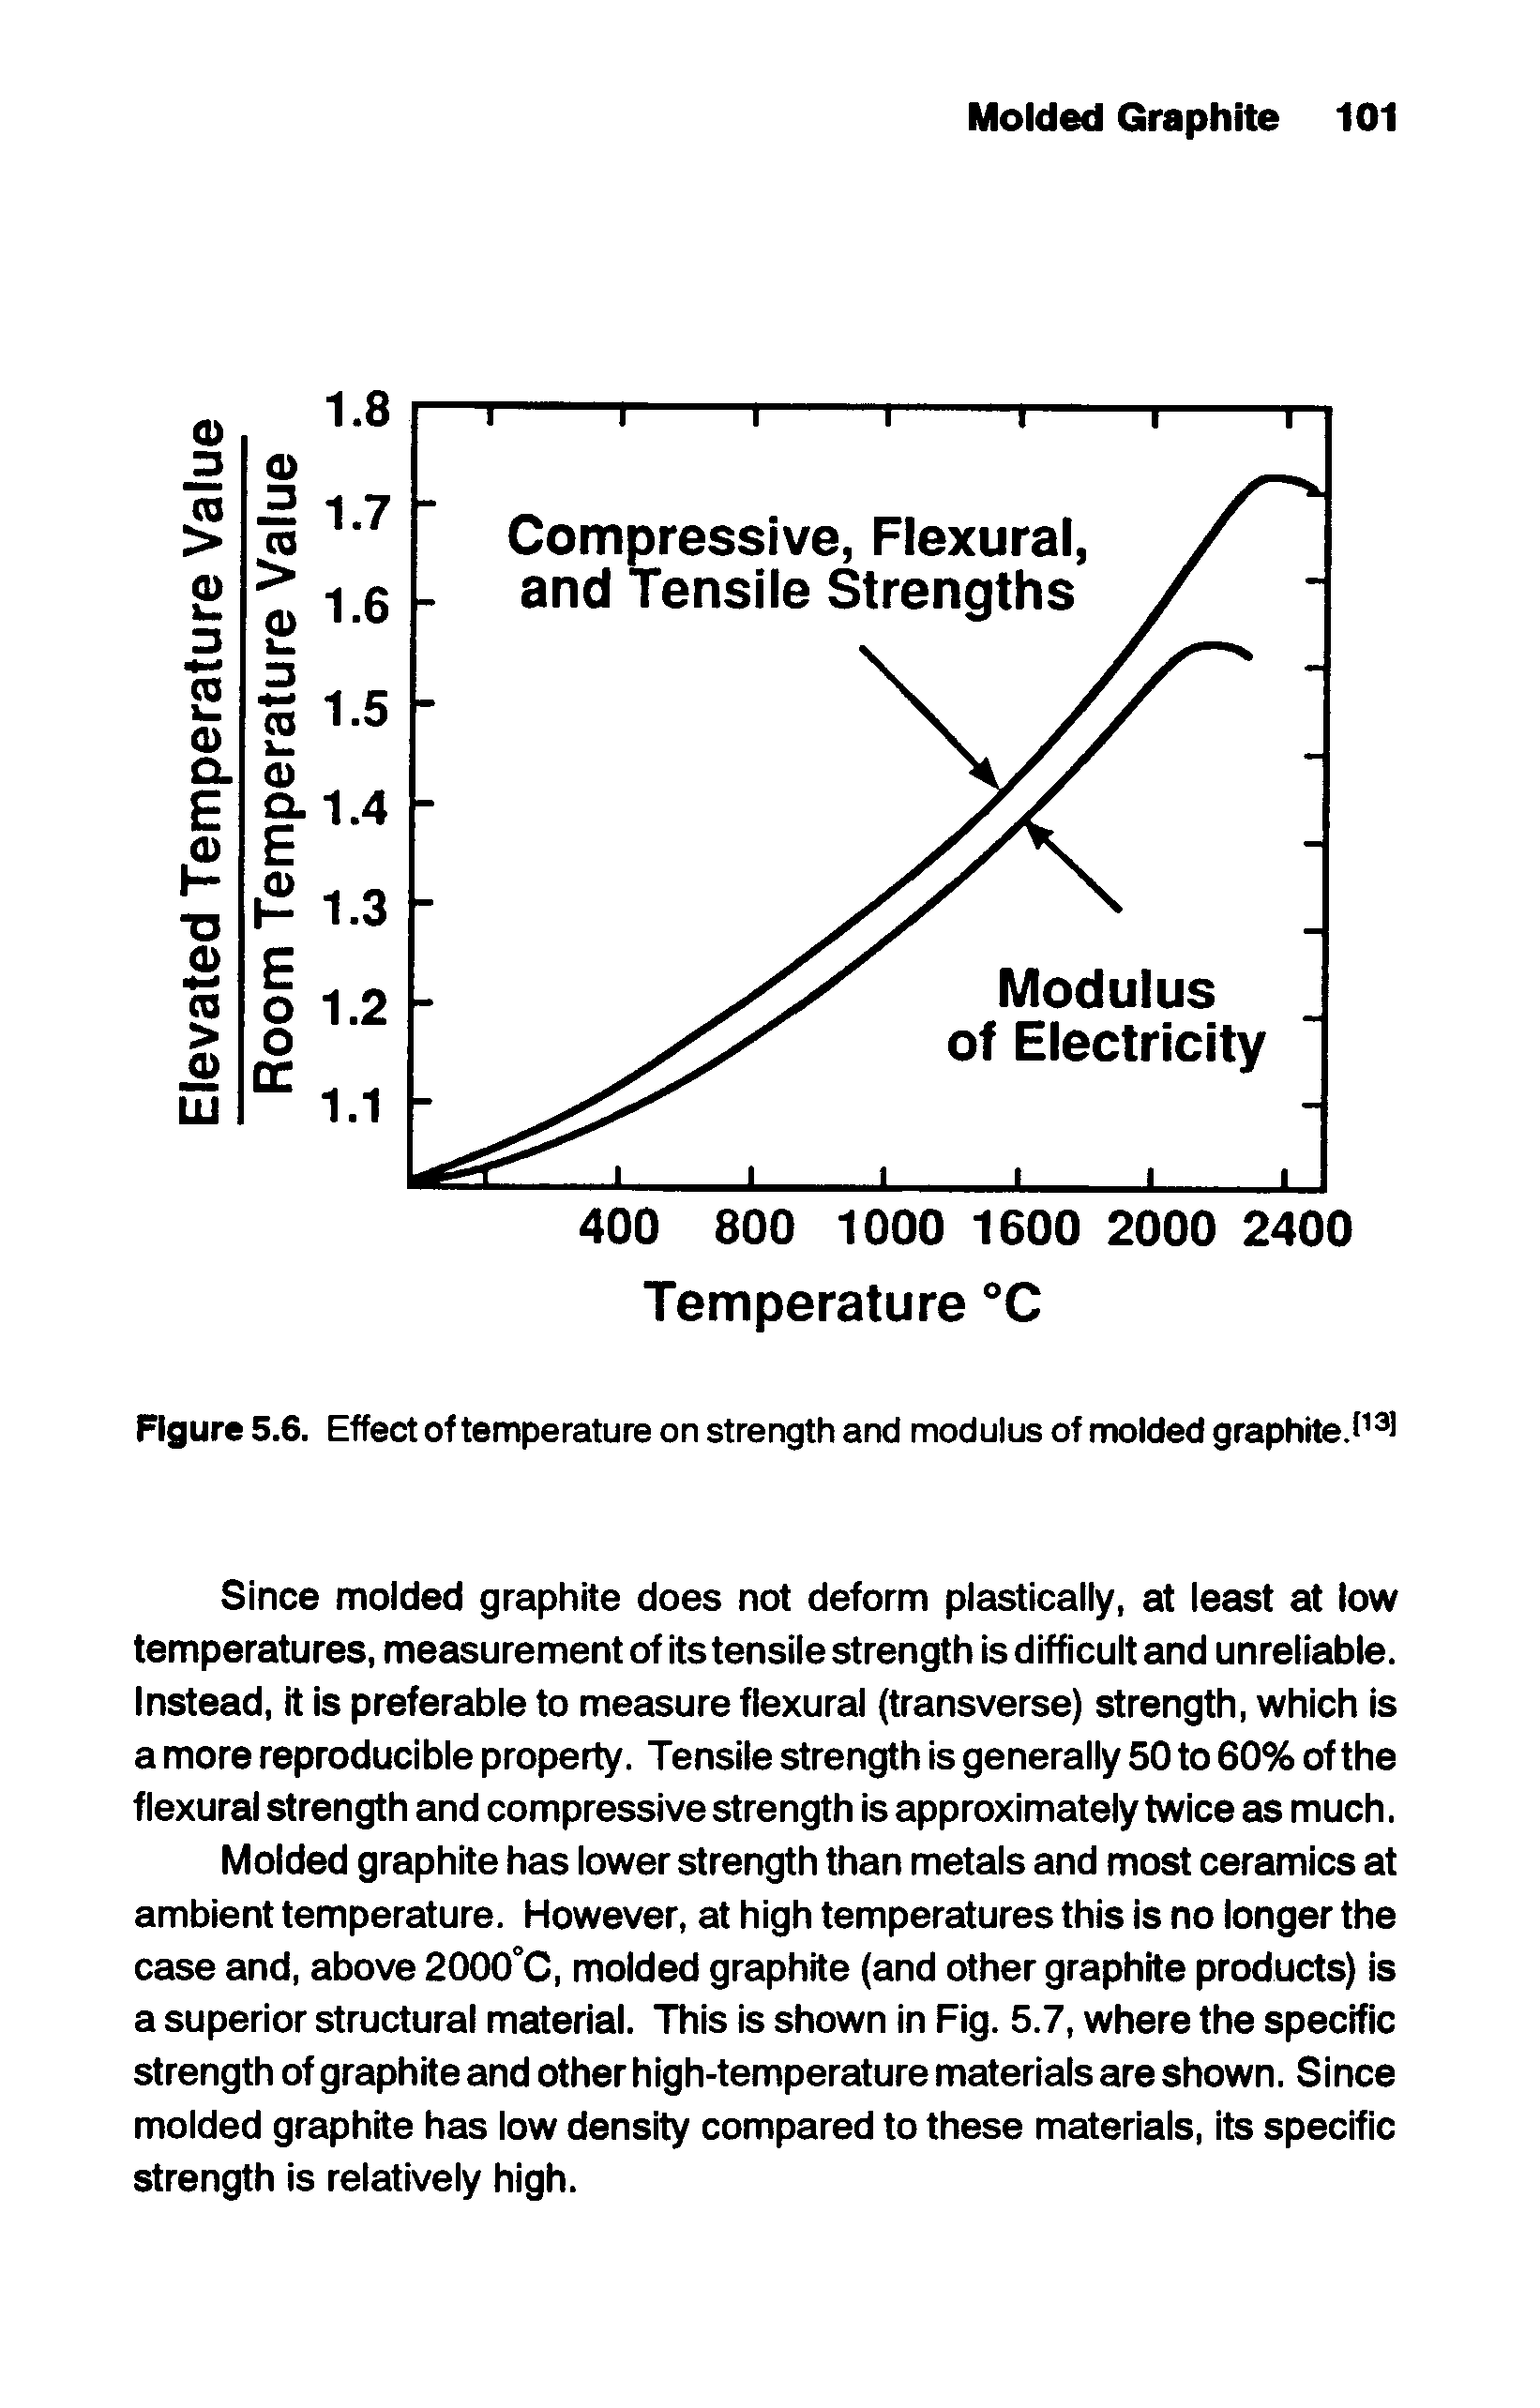 Figure 5.6. Effect of temperature on strength and modulus of molded graphite.